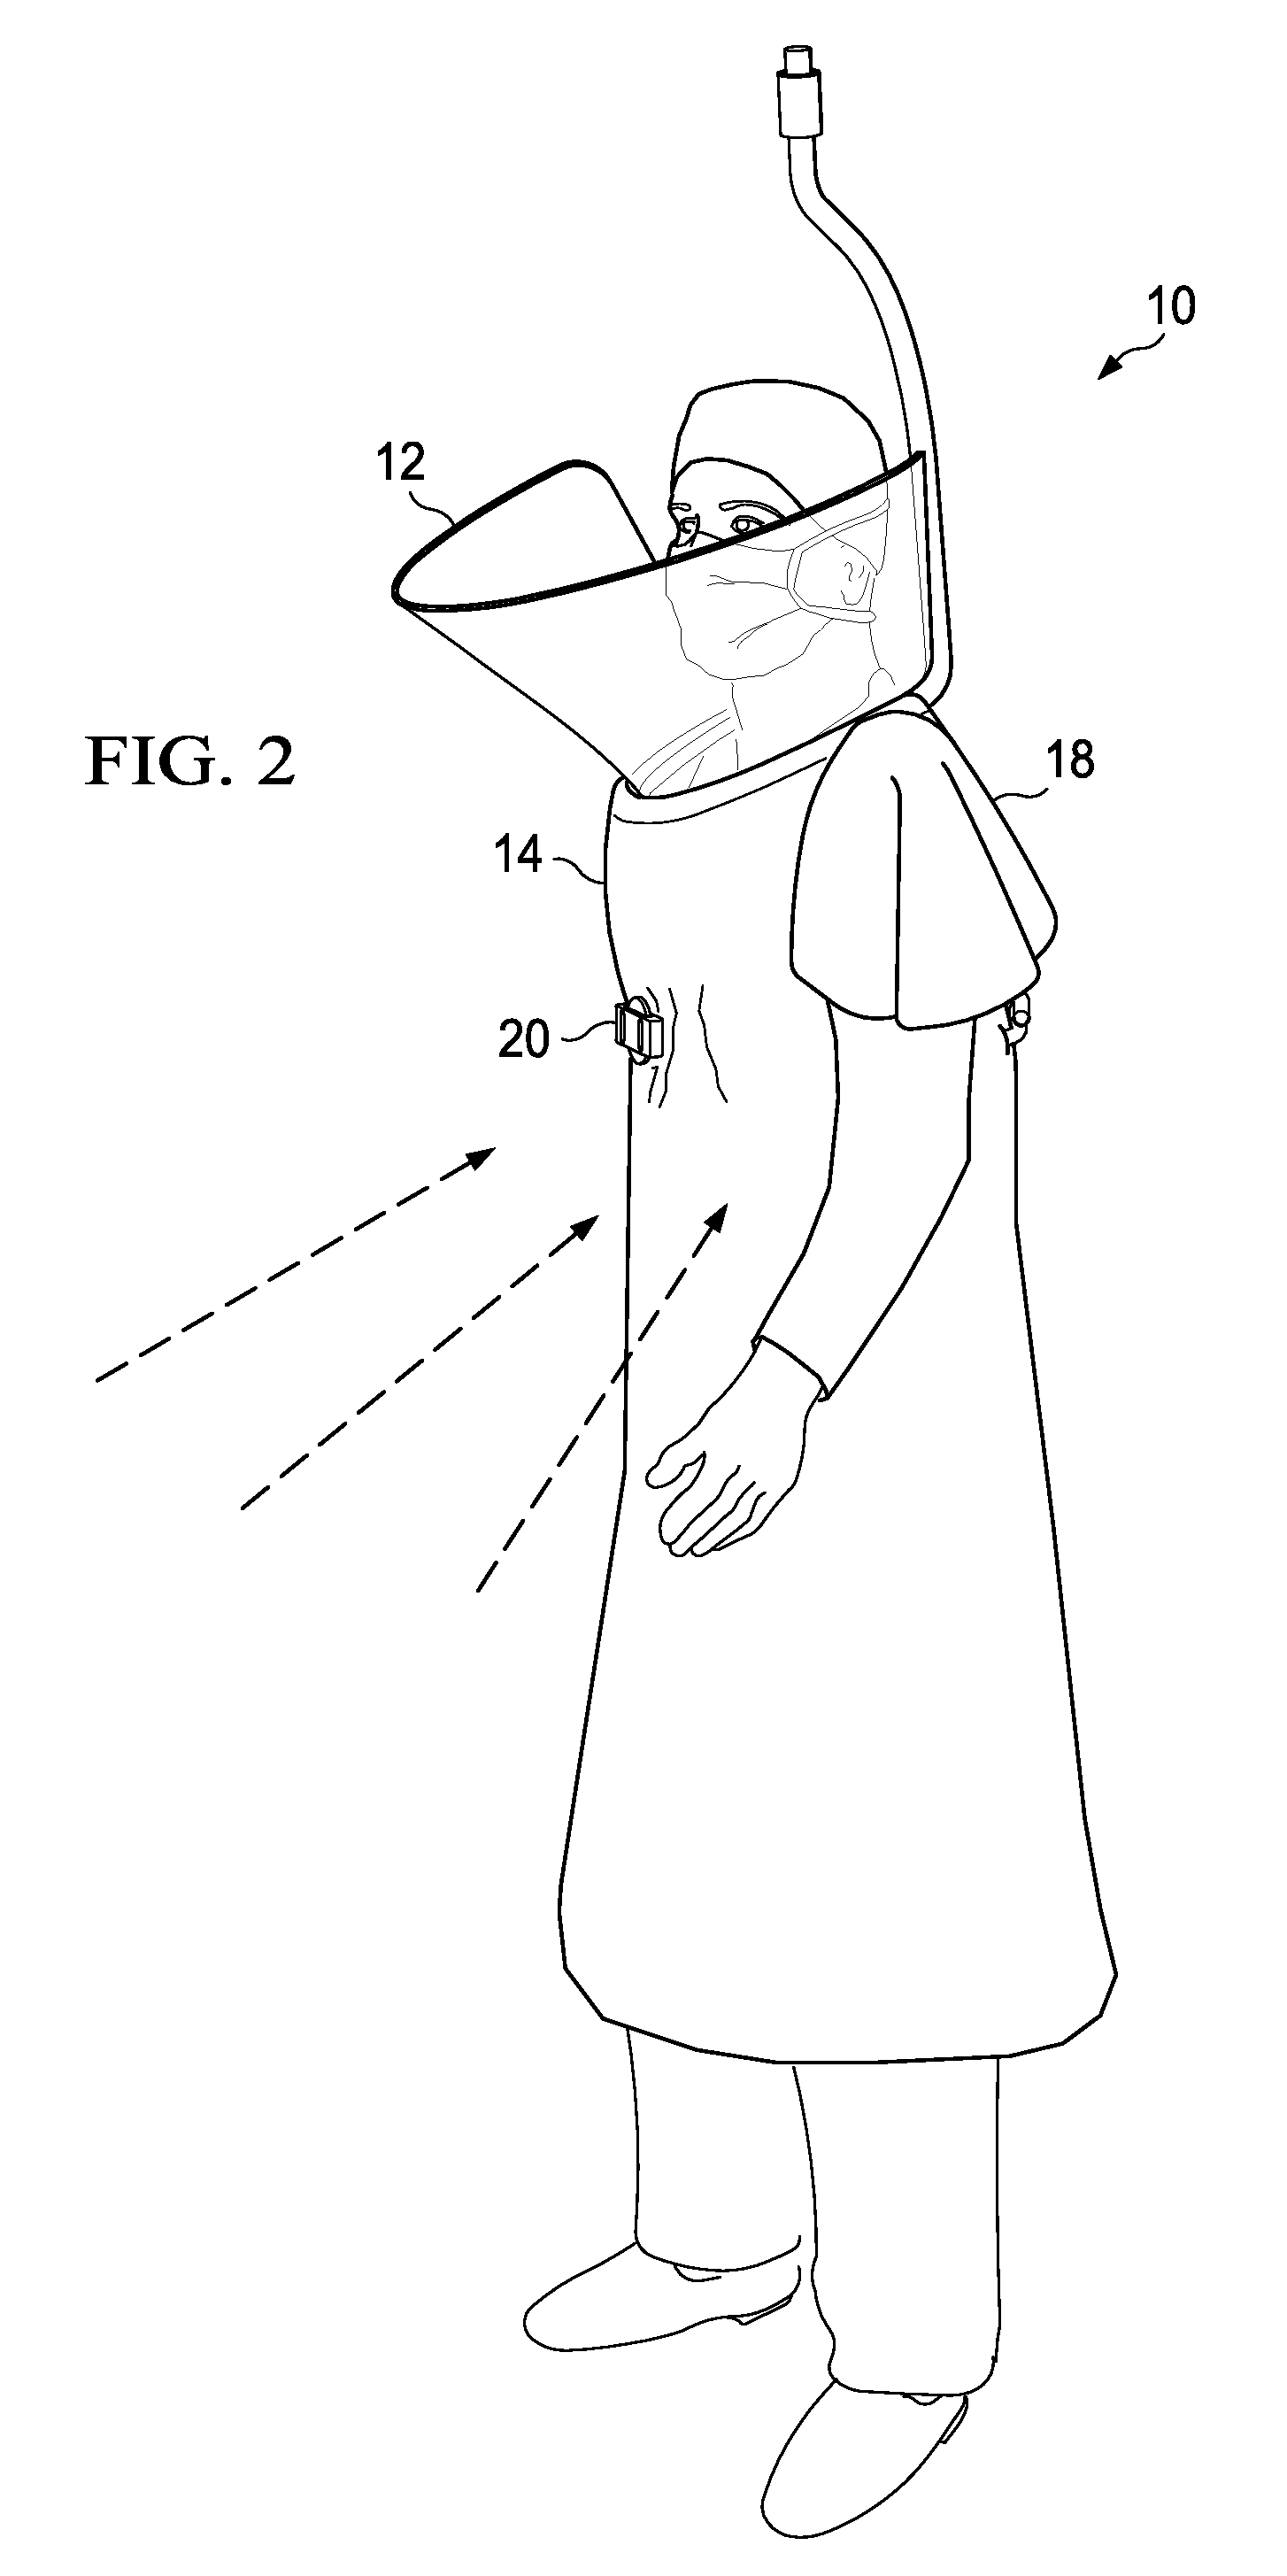 System and Method For Providing a Suspended Personal Radiation Protection System